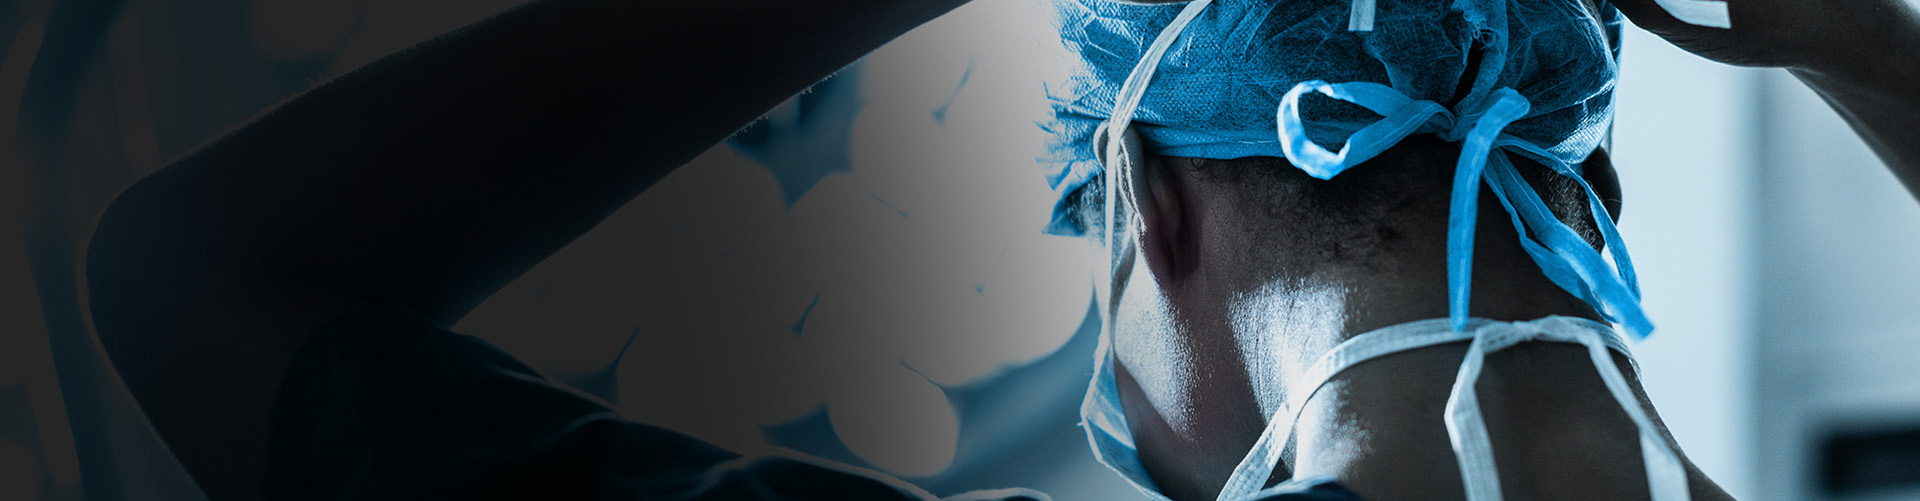 View of medical professional's back of head wearing a surgical mask